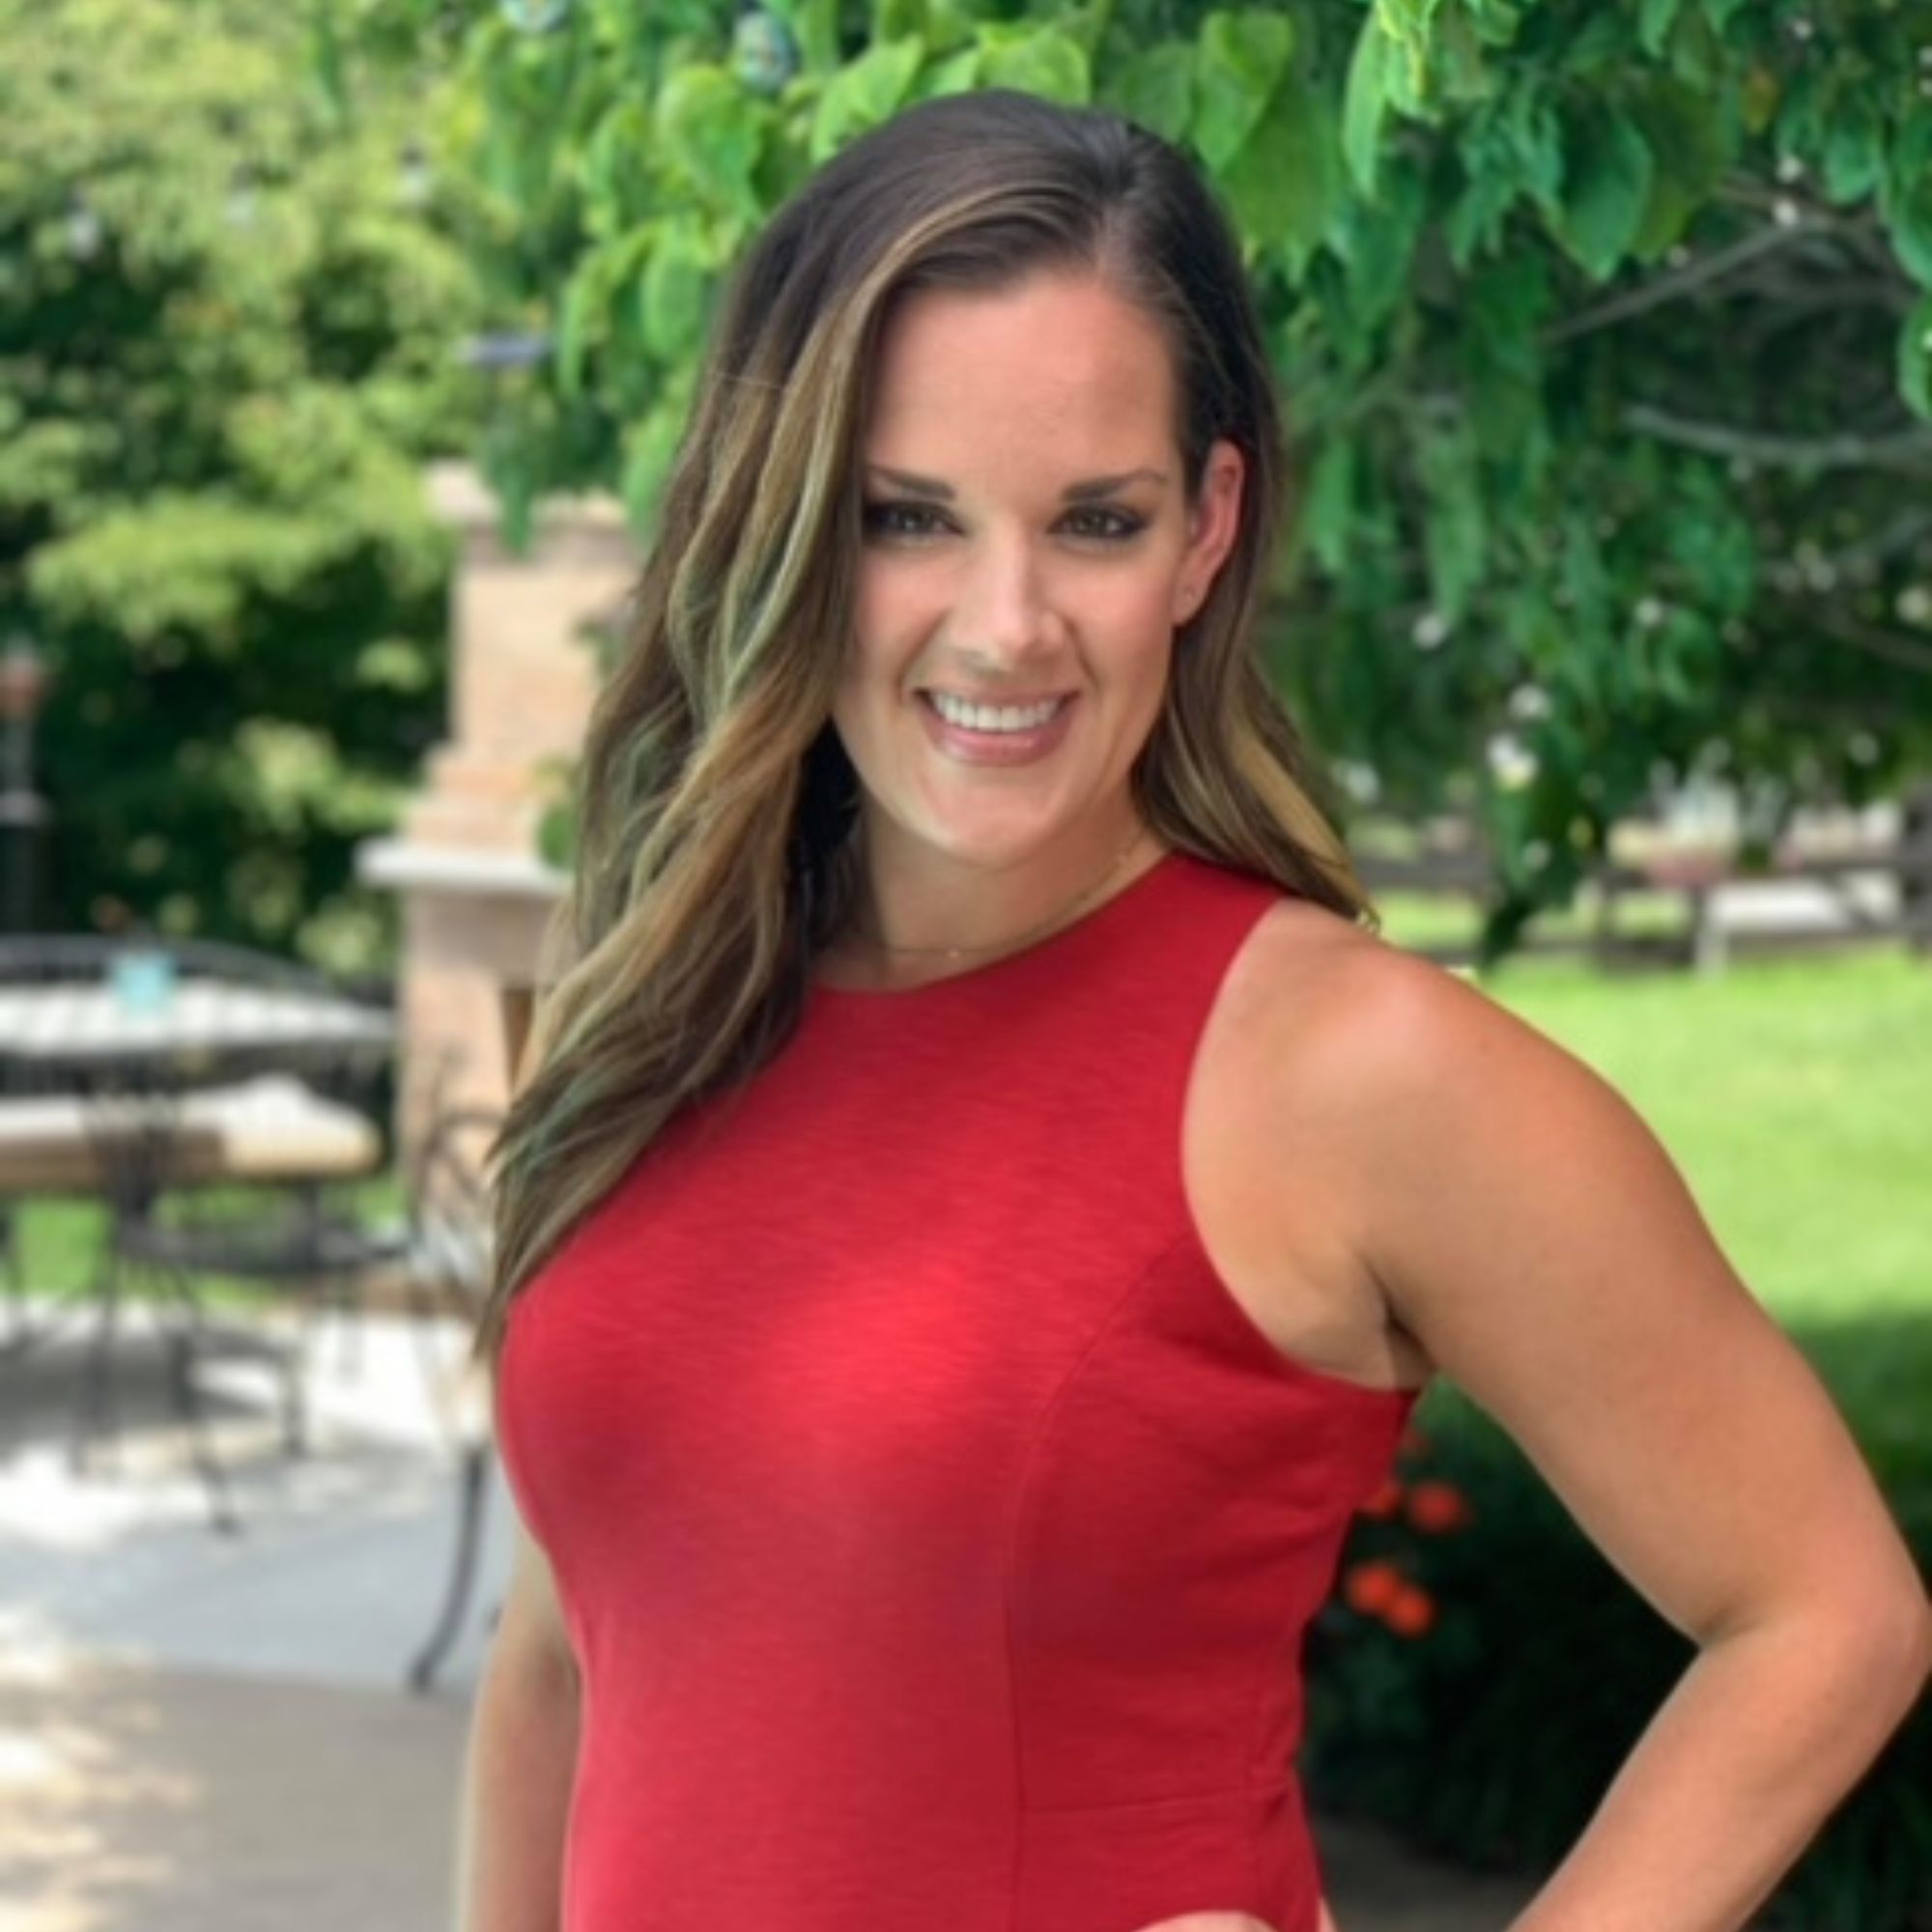 A picture of Katie Zimmerman, a woman with brown hair wearing a red dress stood outdoors